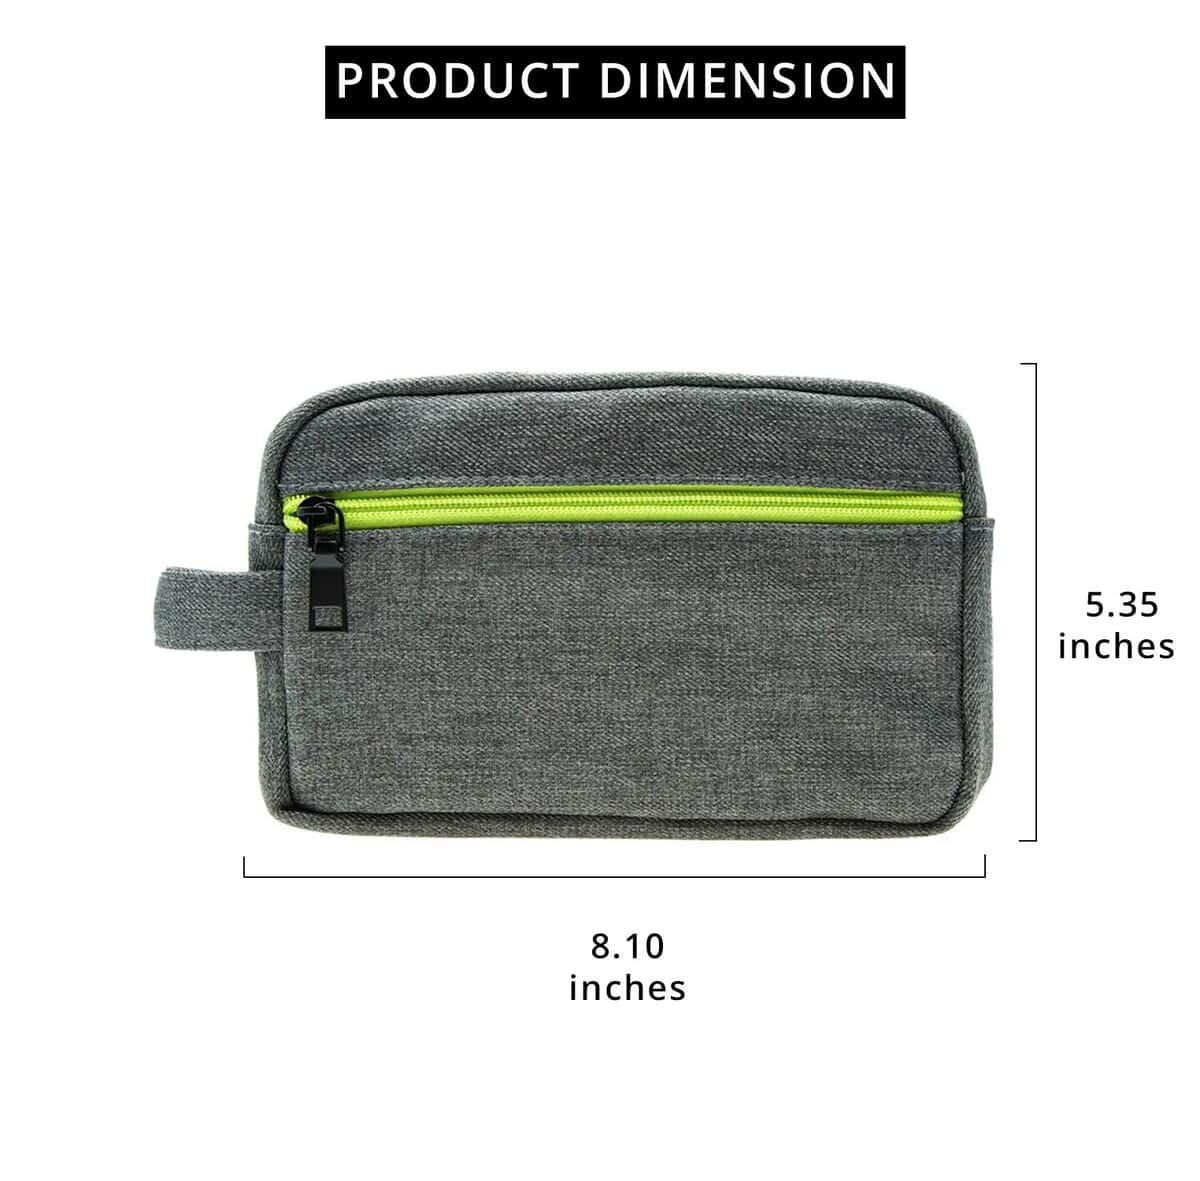 Gray Canvas Textured Dopp Kit With Lime Green Zipper (8.1"x5.35"x2.8") image number 5